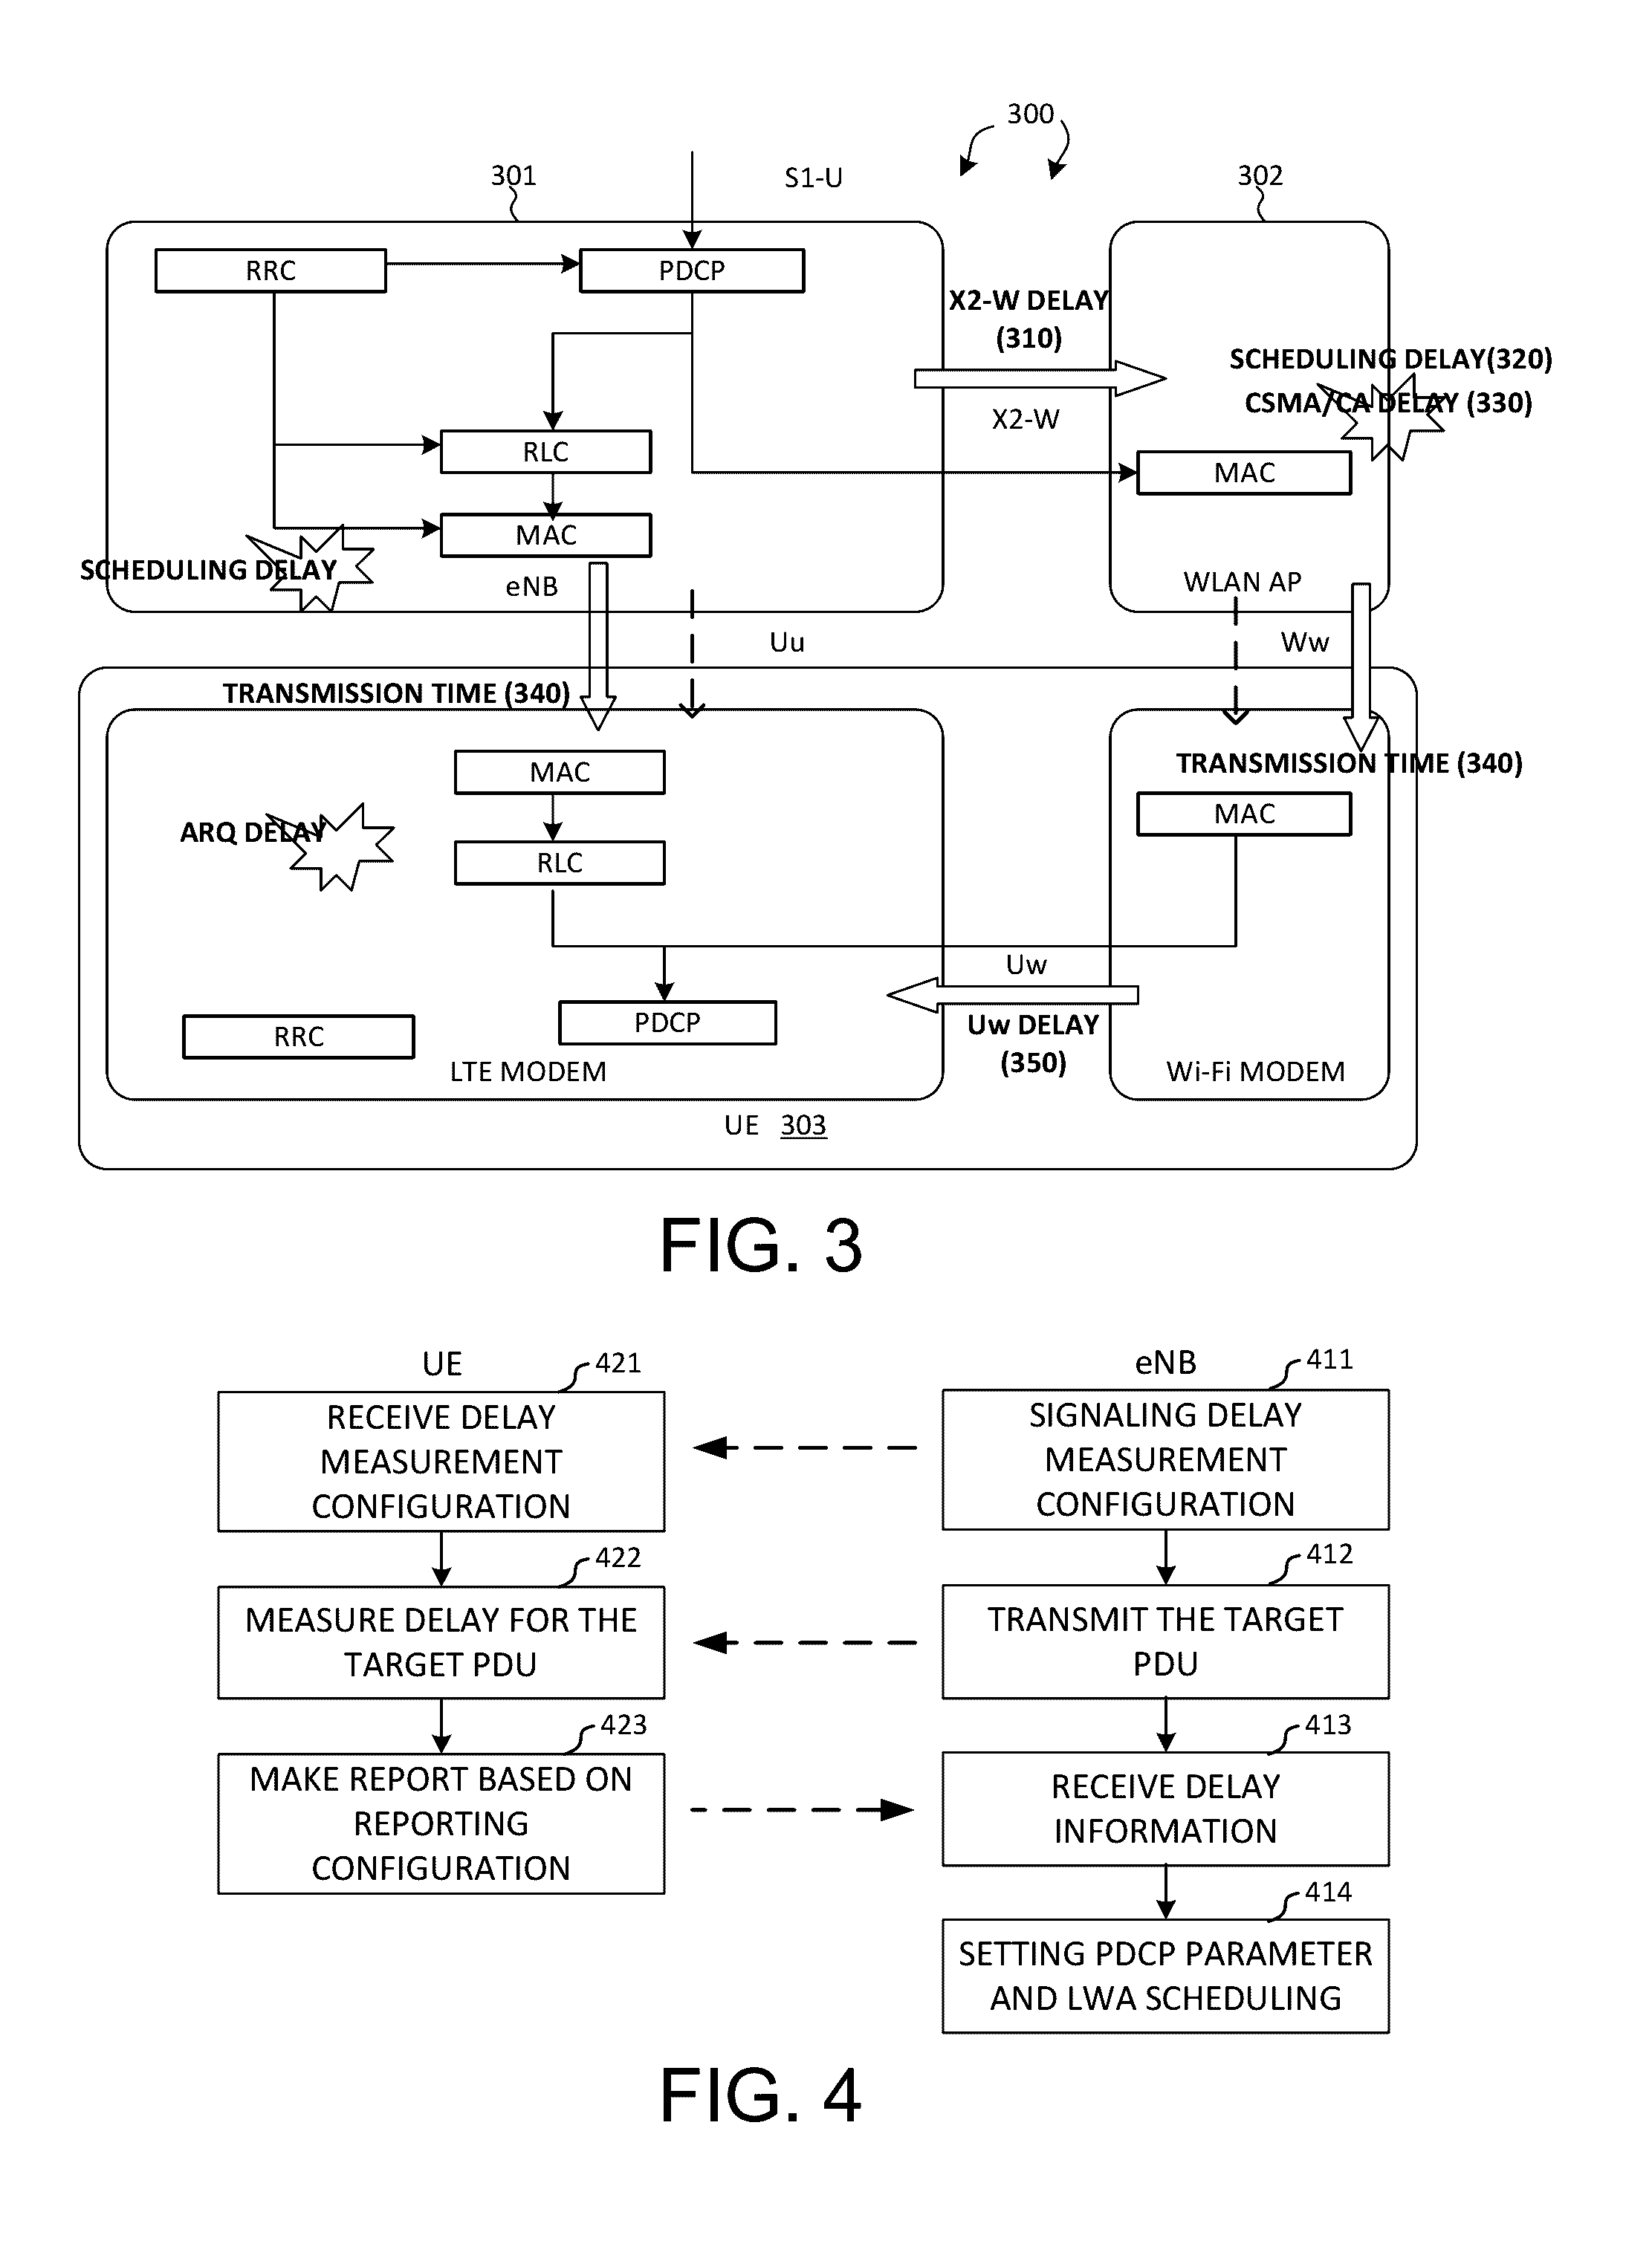 Method and Apparatus of Latency Measurement for LTE-WLAN Aggregation